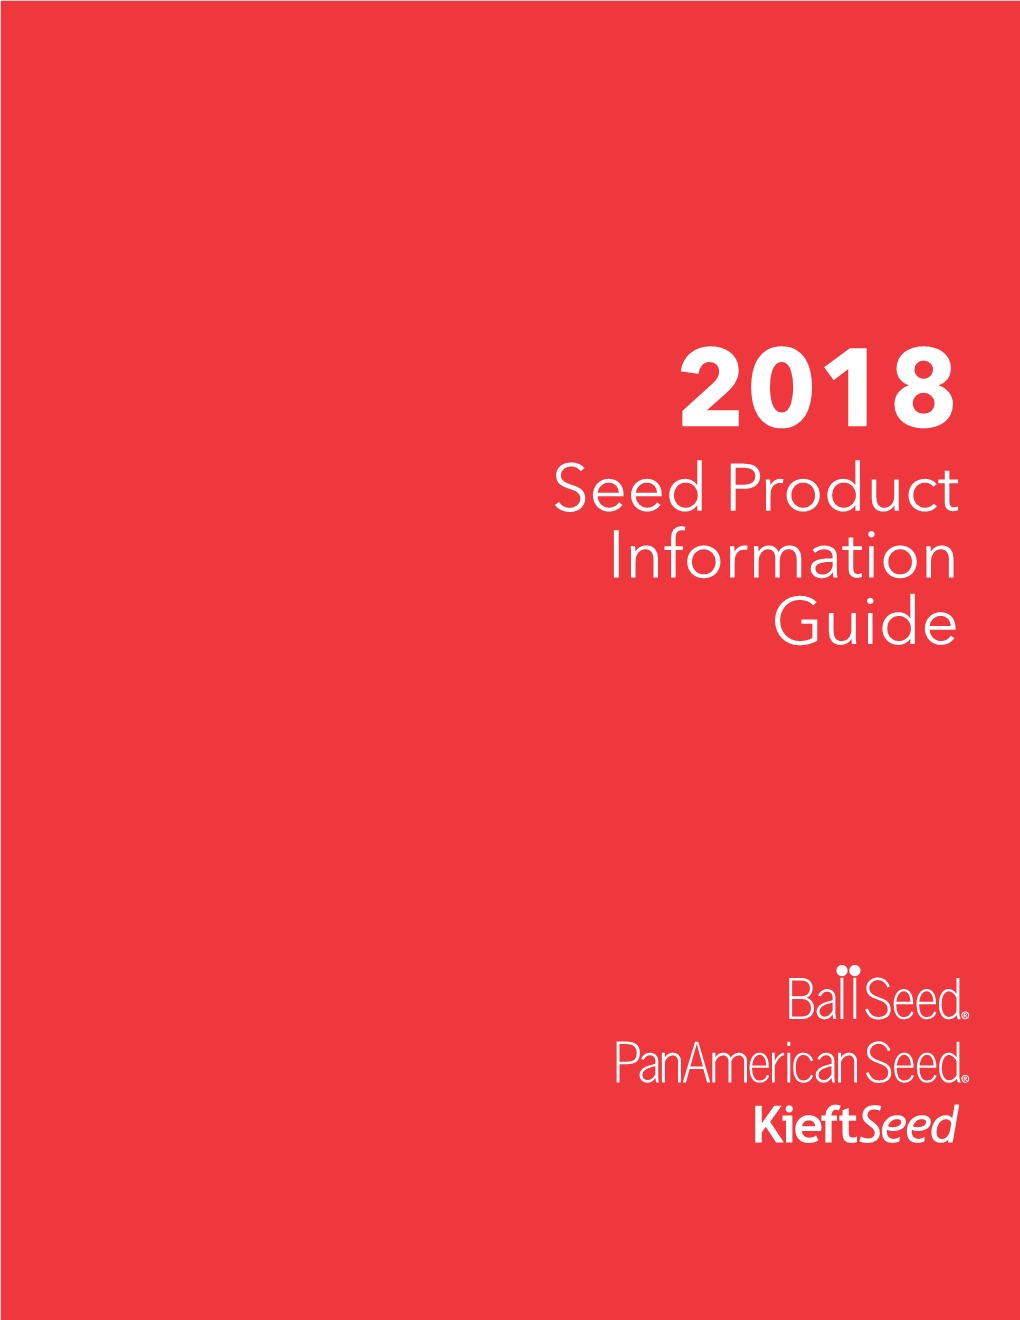 Seed Product Information Guide